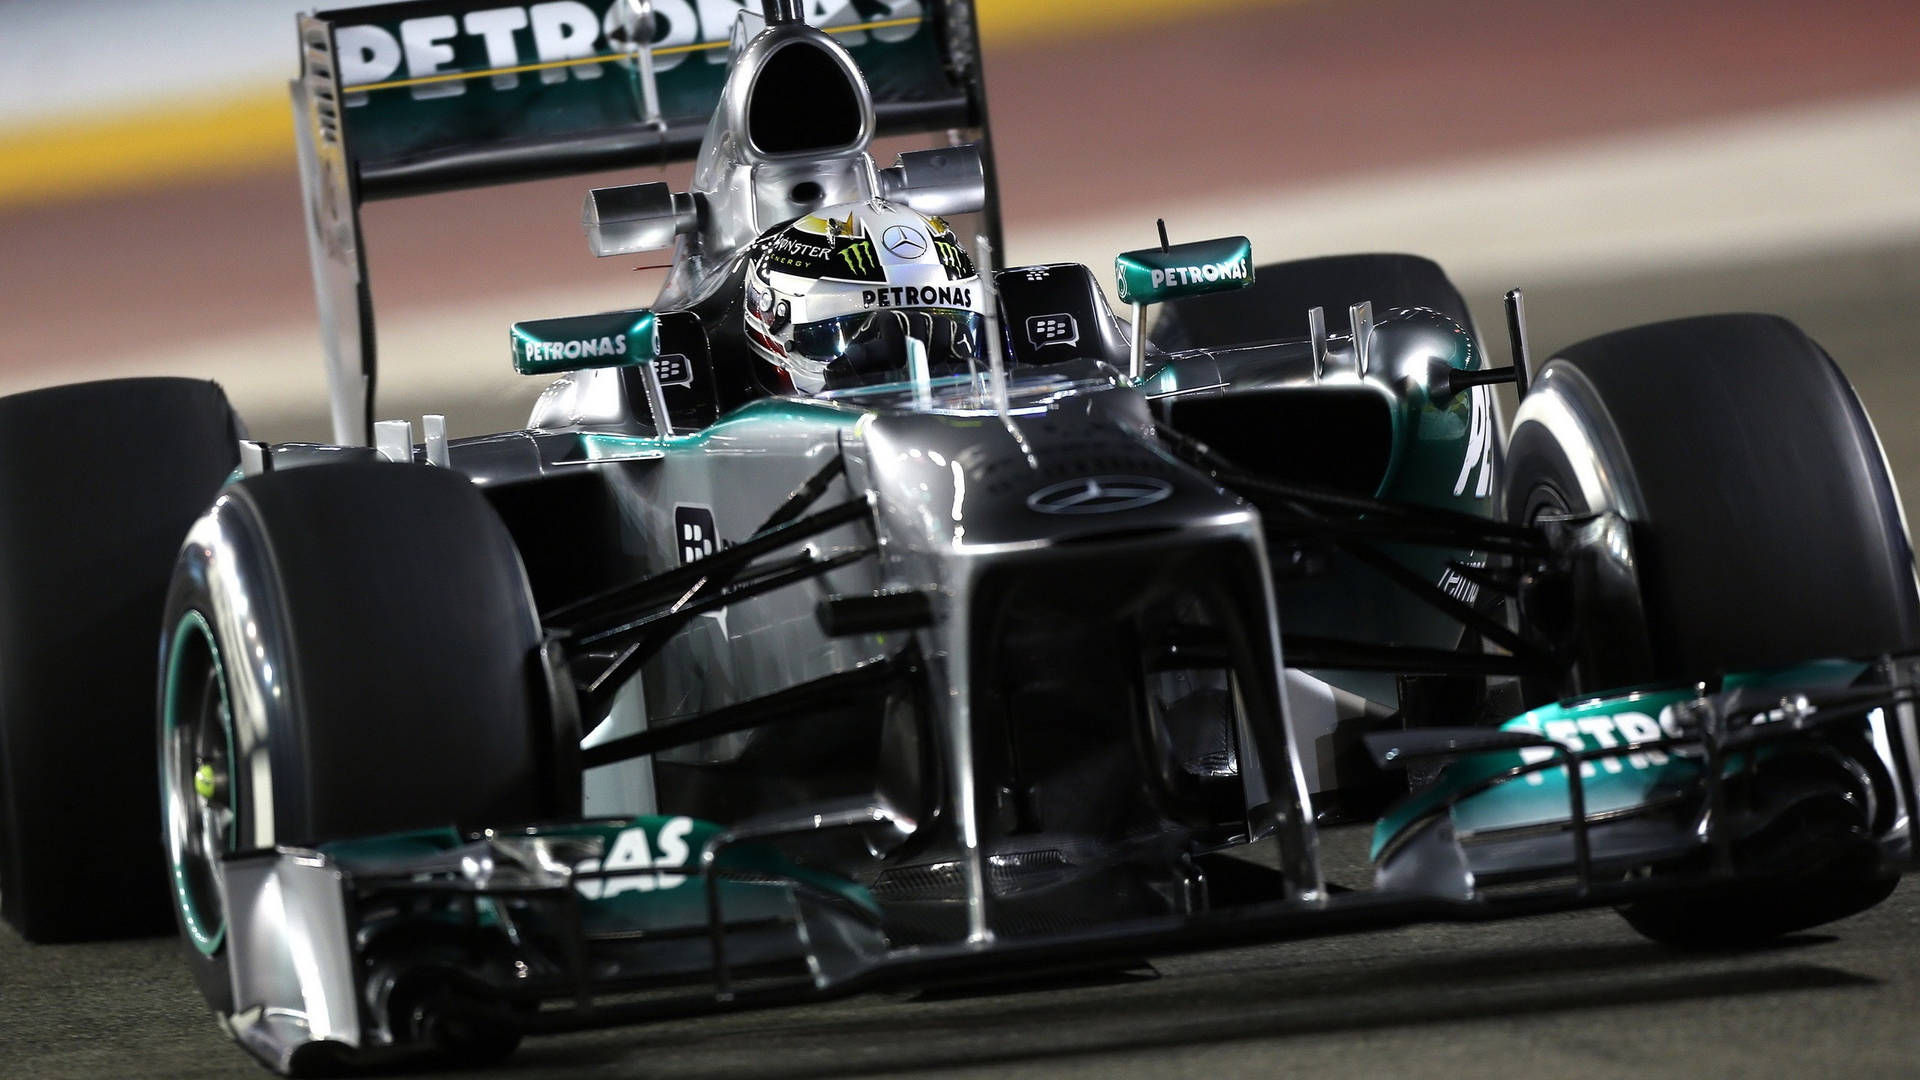 Amazing Front View Of The Racing Car Of Hamilton F1 Wallpaper